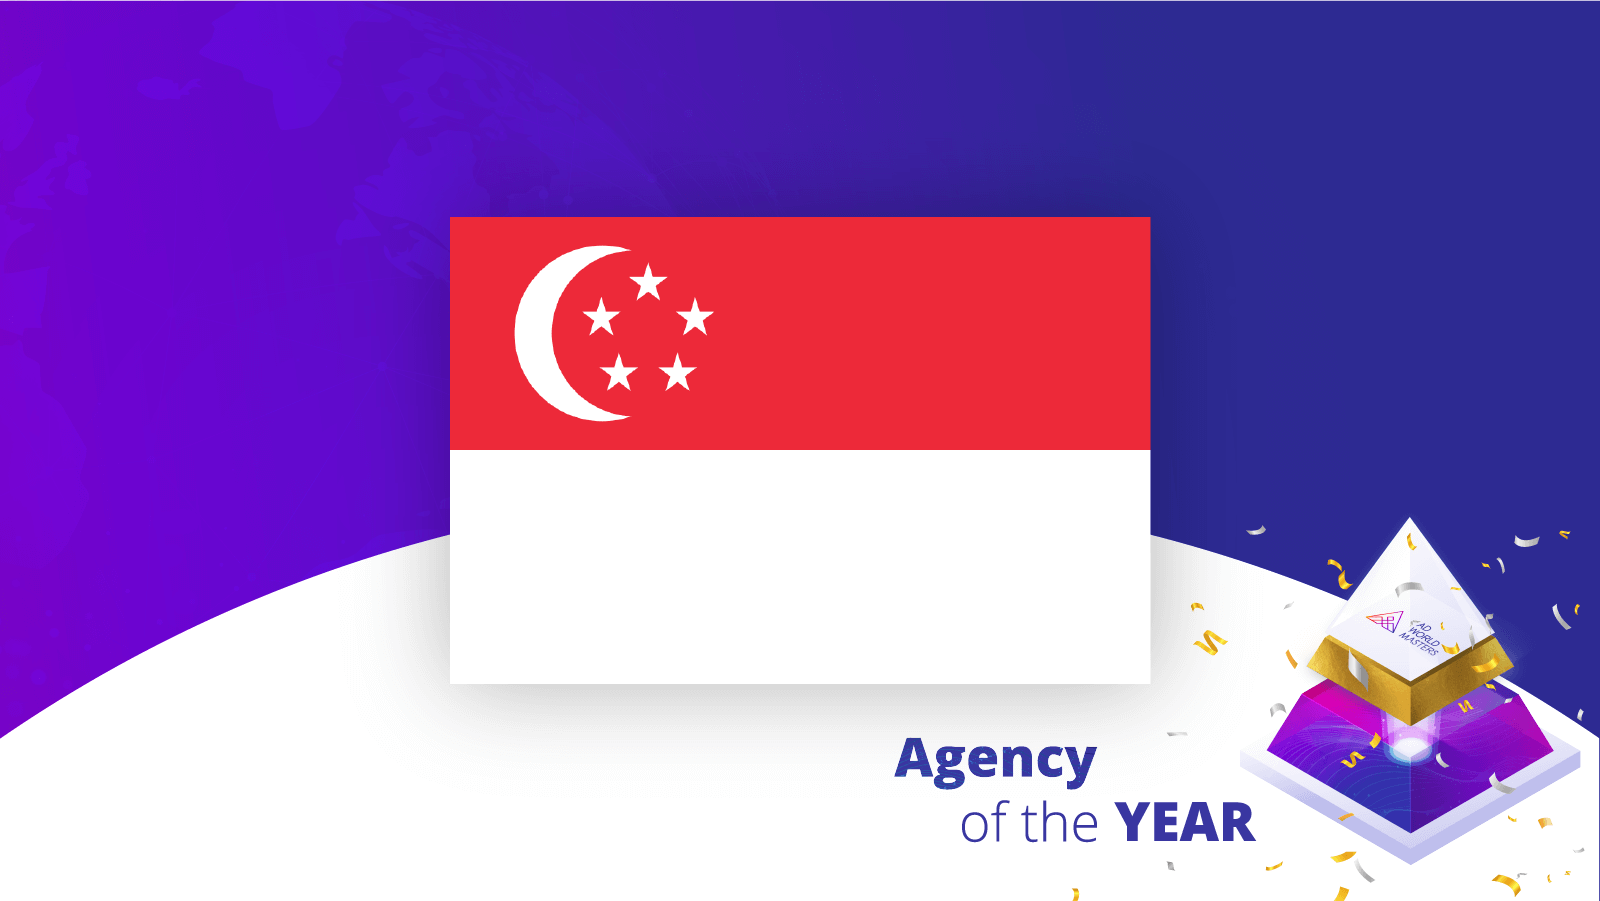 Agencies of the Year Singapore